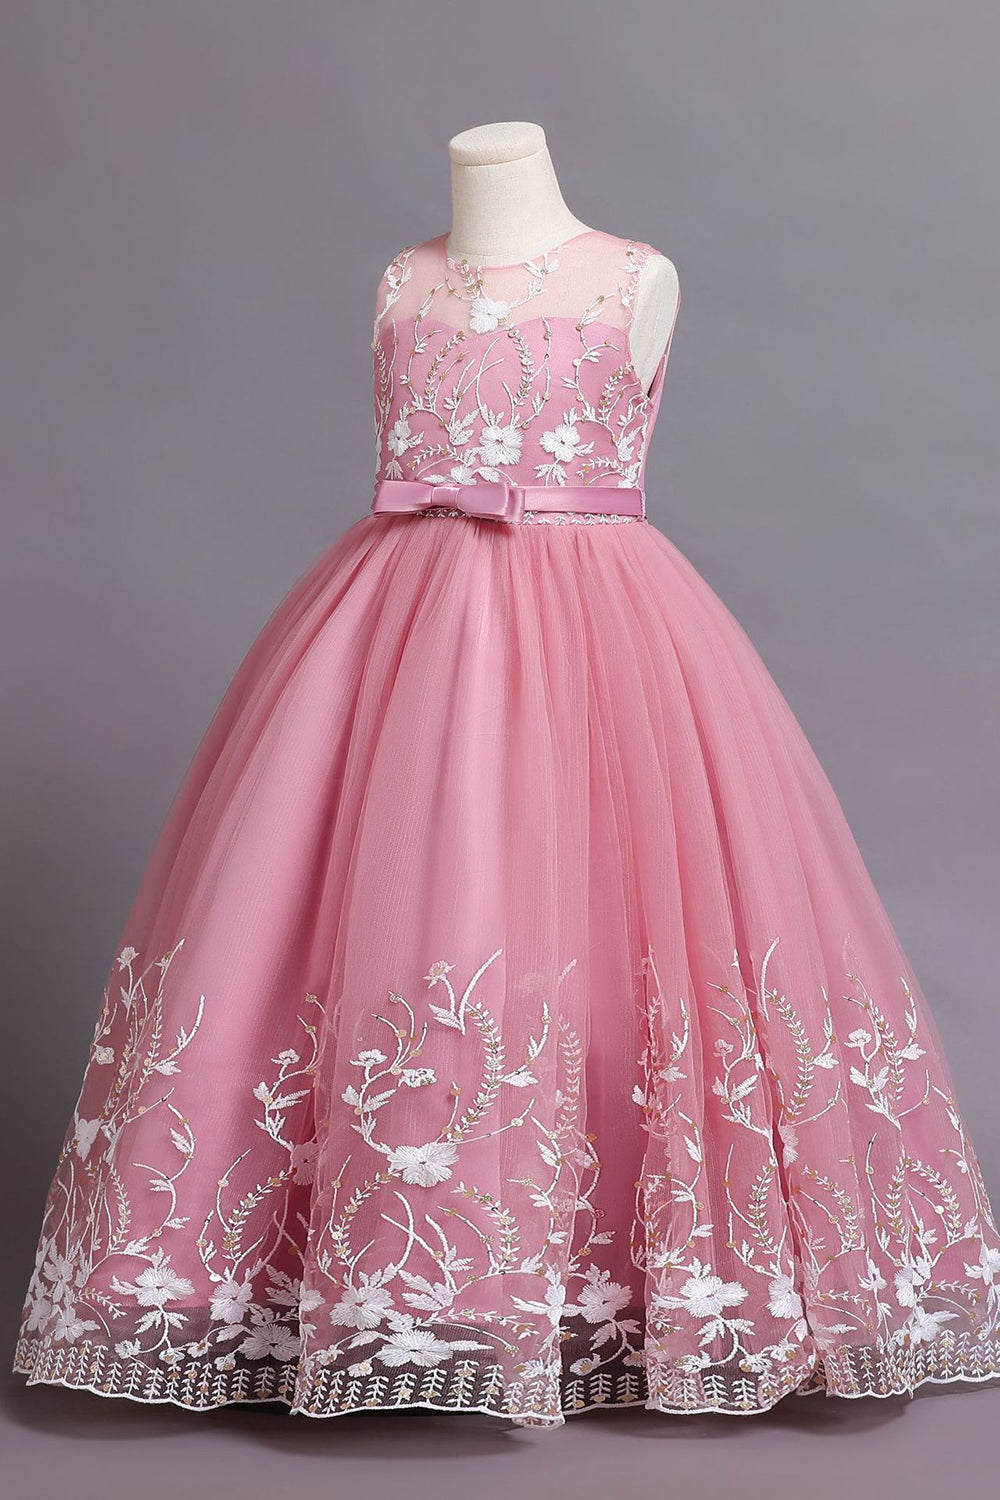 Tulle Blush Flower Girl Dress with Bowknot